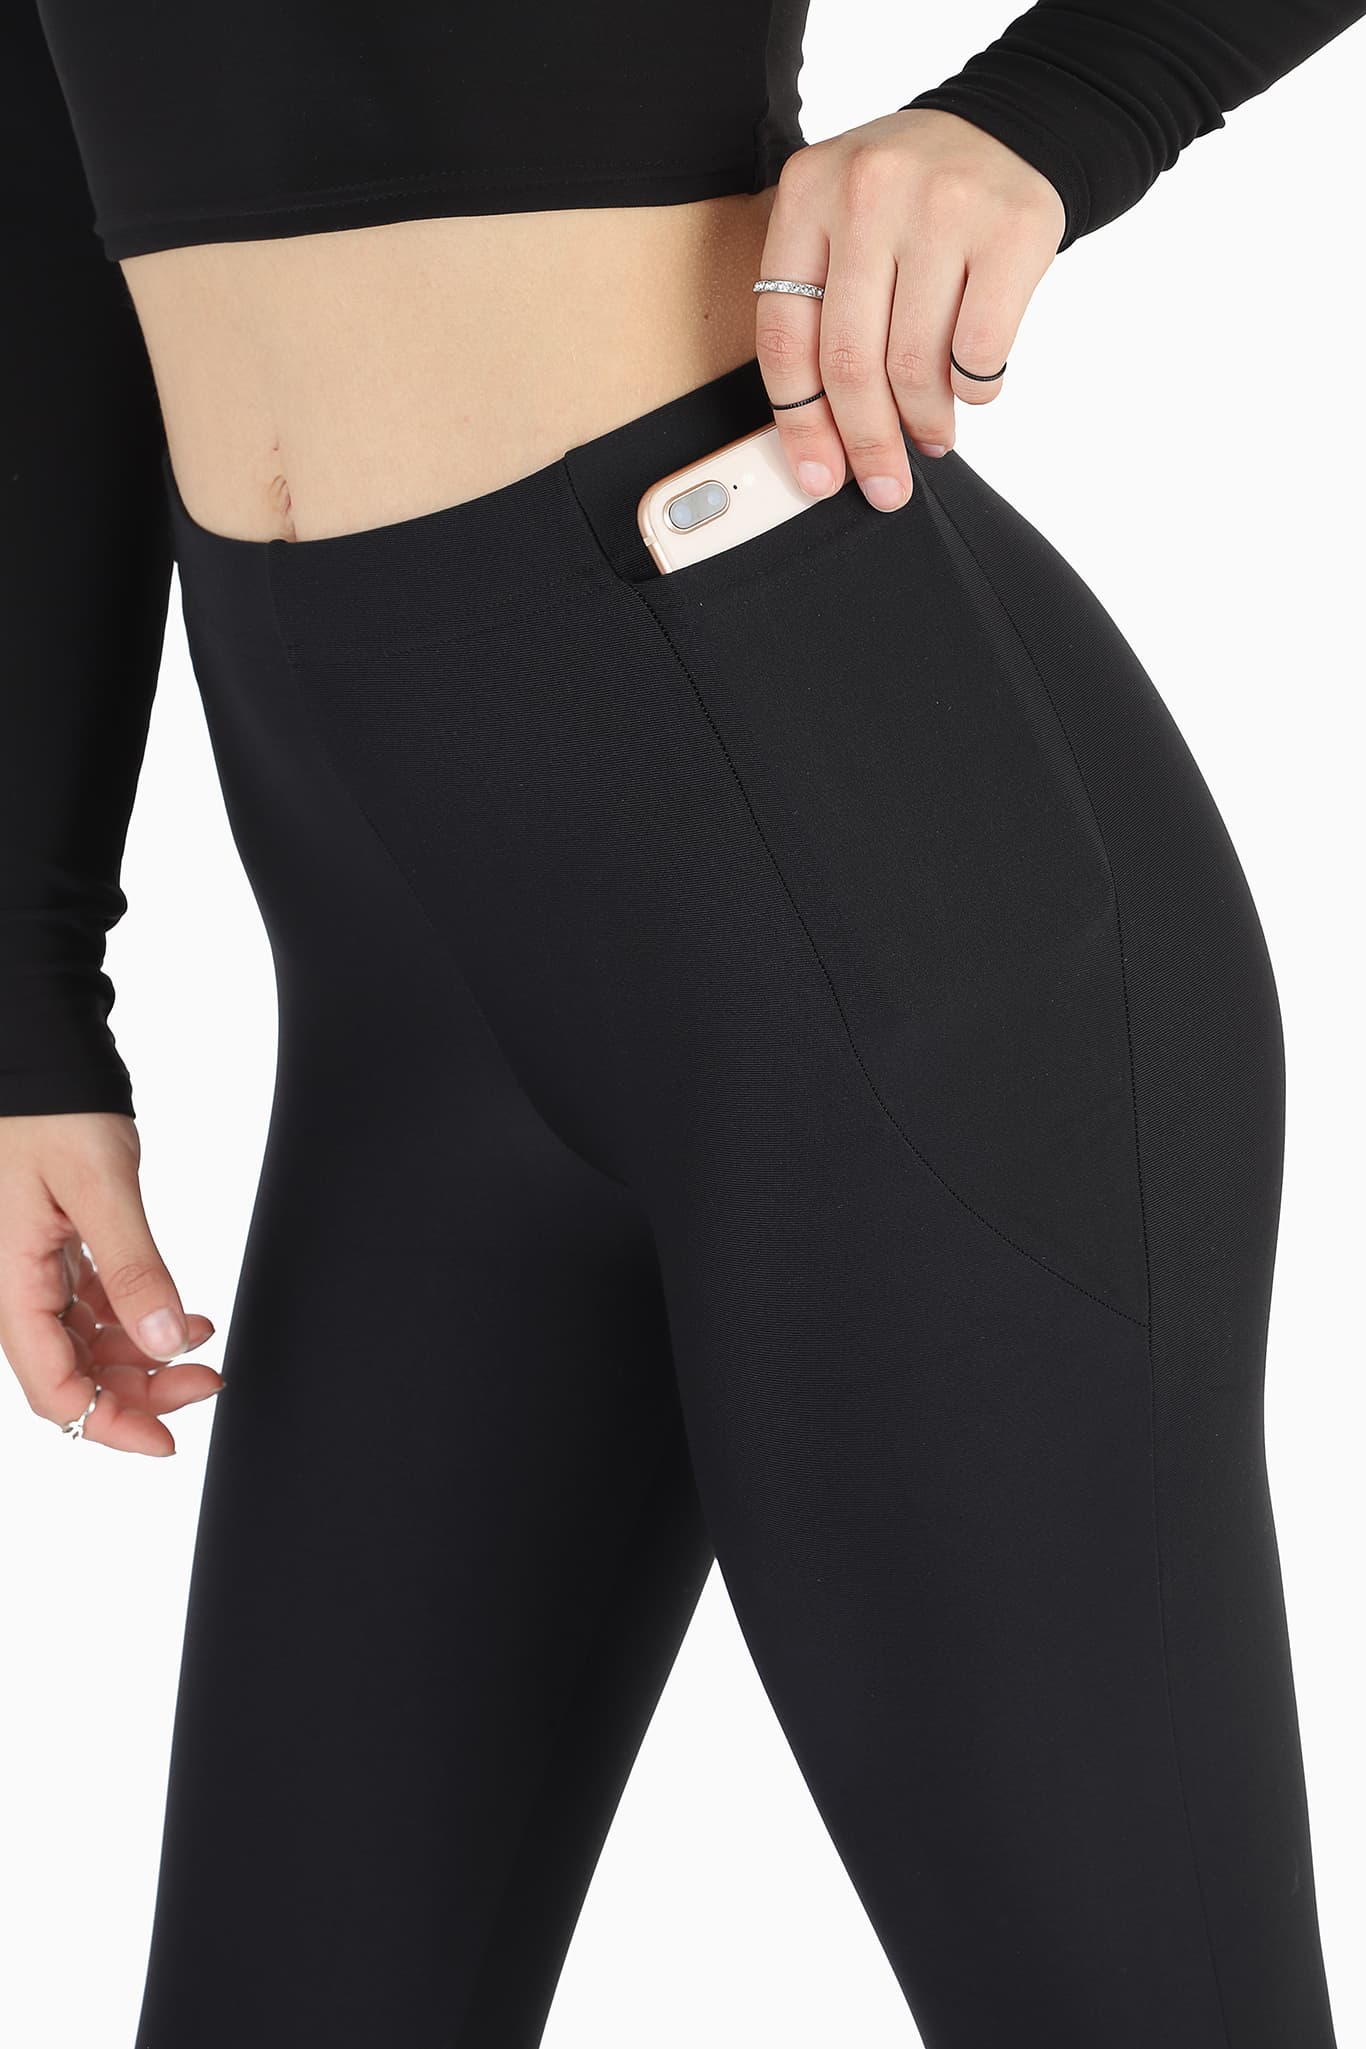 Buy Nirlon Women's Leggings with Pockets High Waisted Workout Yoga Pants,  Po Black, 3X-Large at Amazon.in